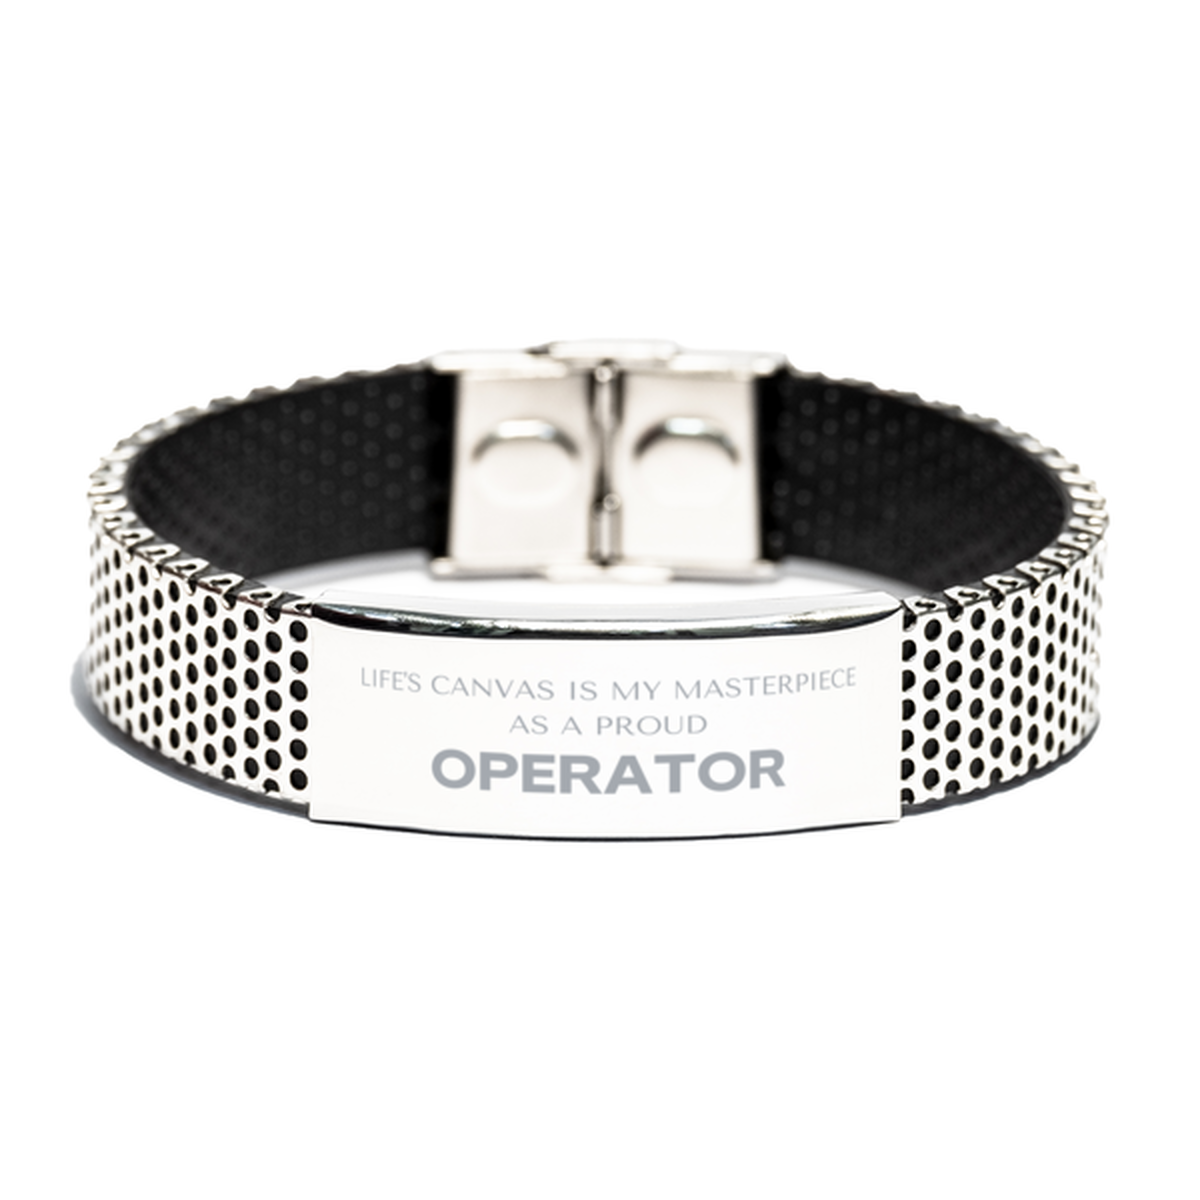 Proud Operator Gifts, Life's canvas is my masterpiece, Epic Birthday Christmas Unique Stainless Steel Bracelet For Operator, Coworkers, Men, Women, Friends